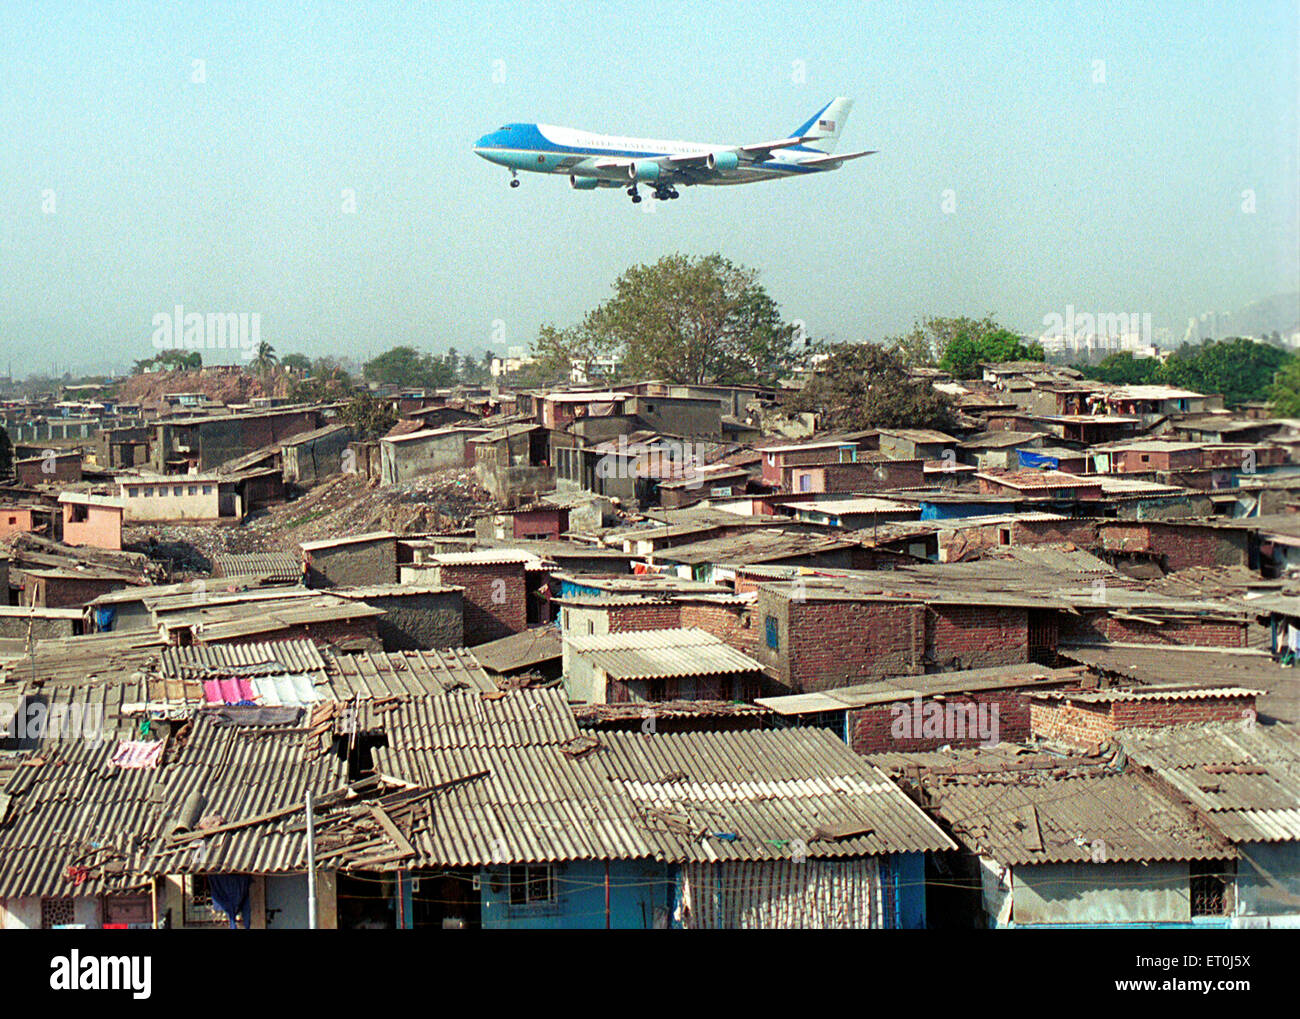 Air force one official carrier American President flying over slums Chattrapati Shivaji International airport in Bombay Mumbai India - mpd 153869 Stock Photo